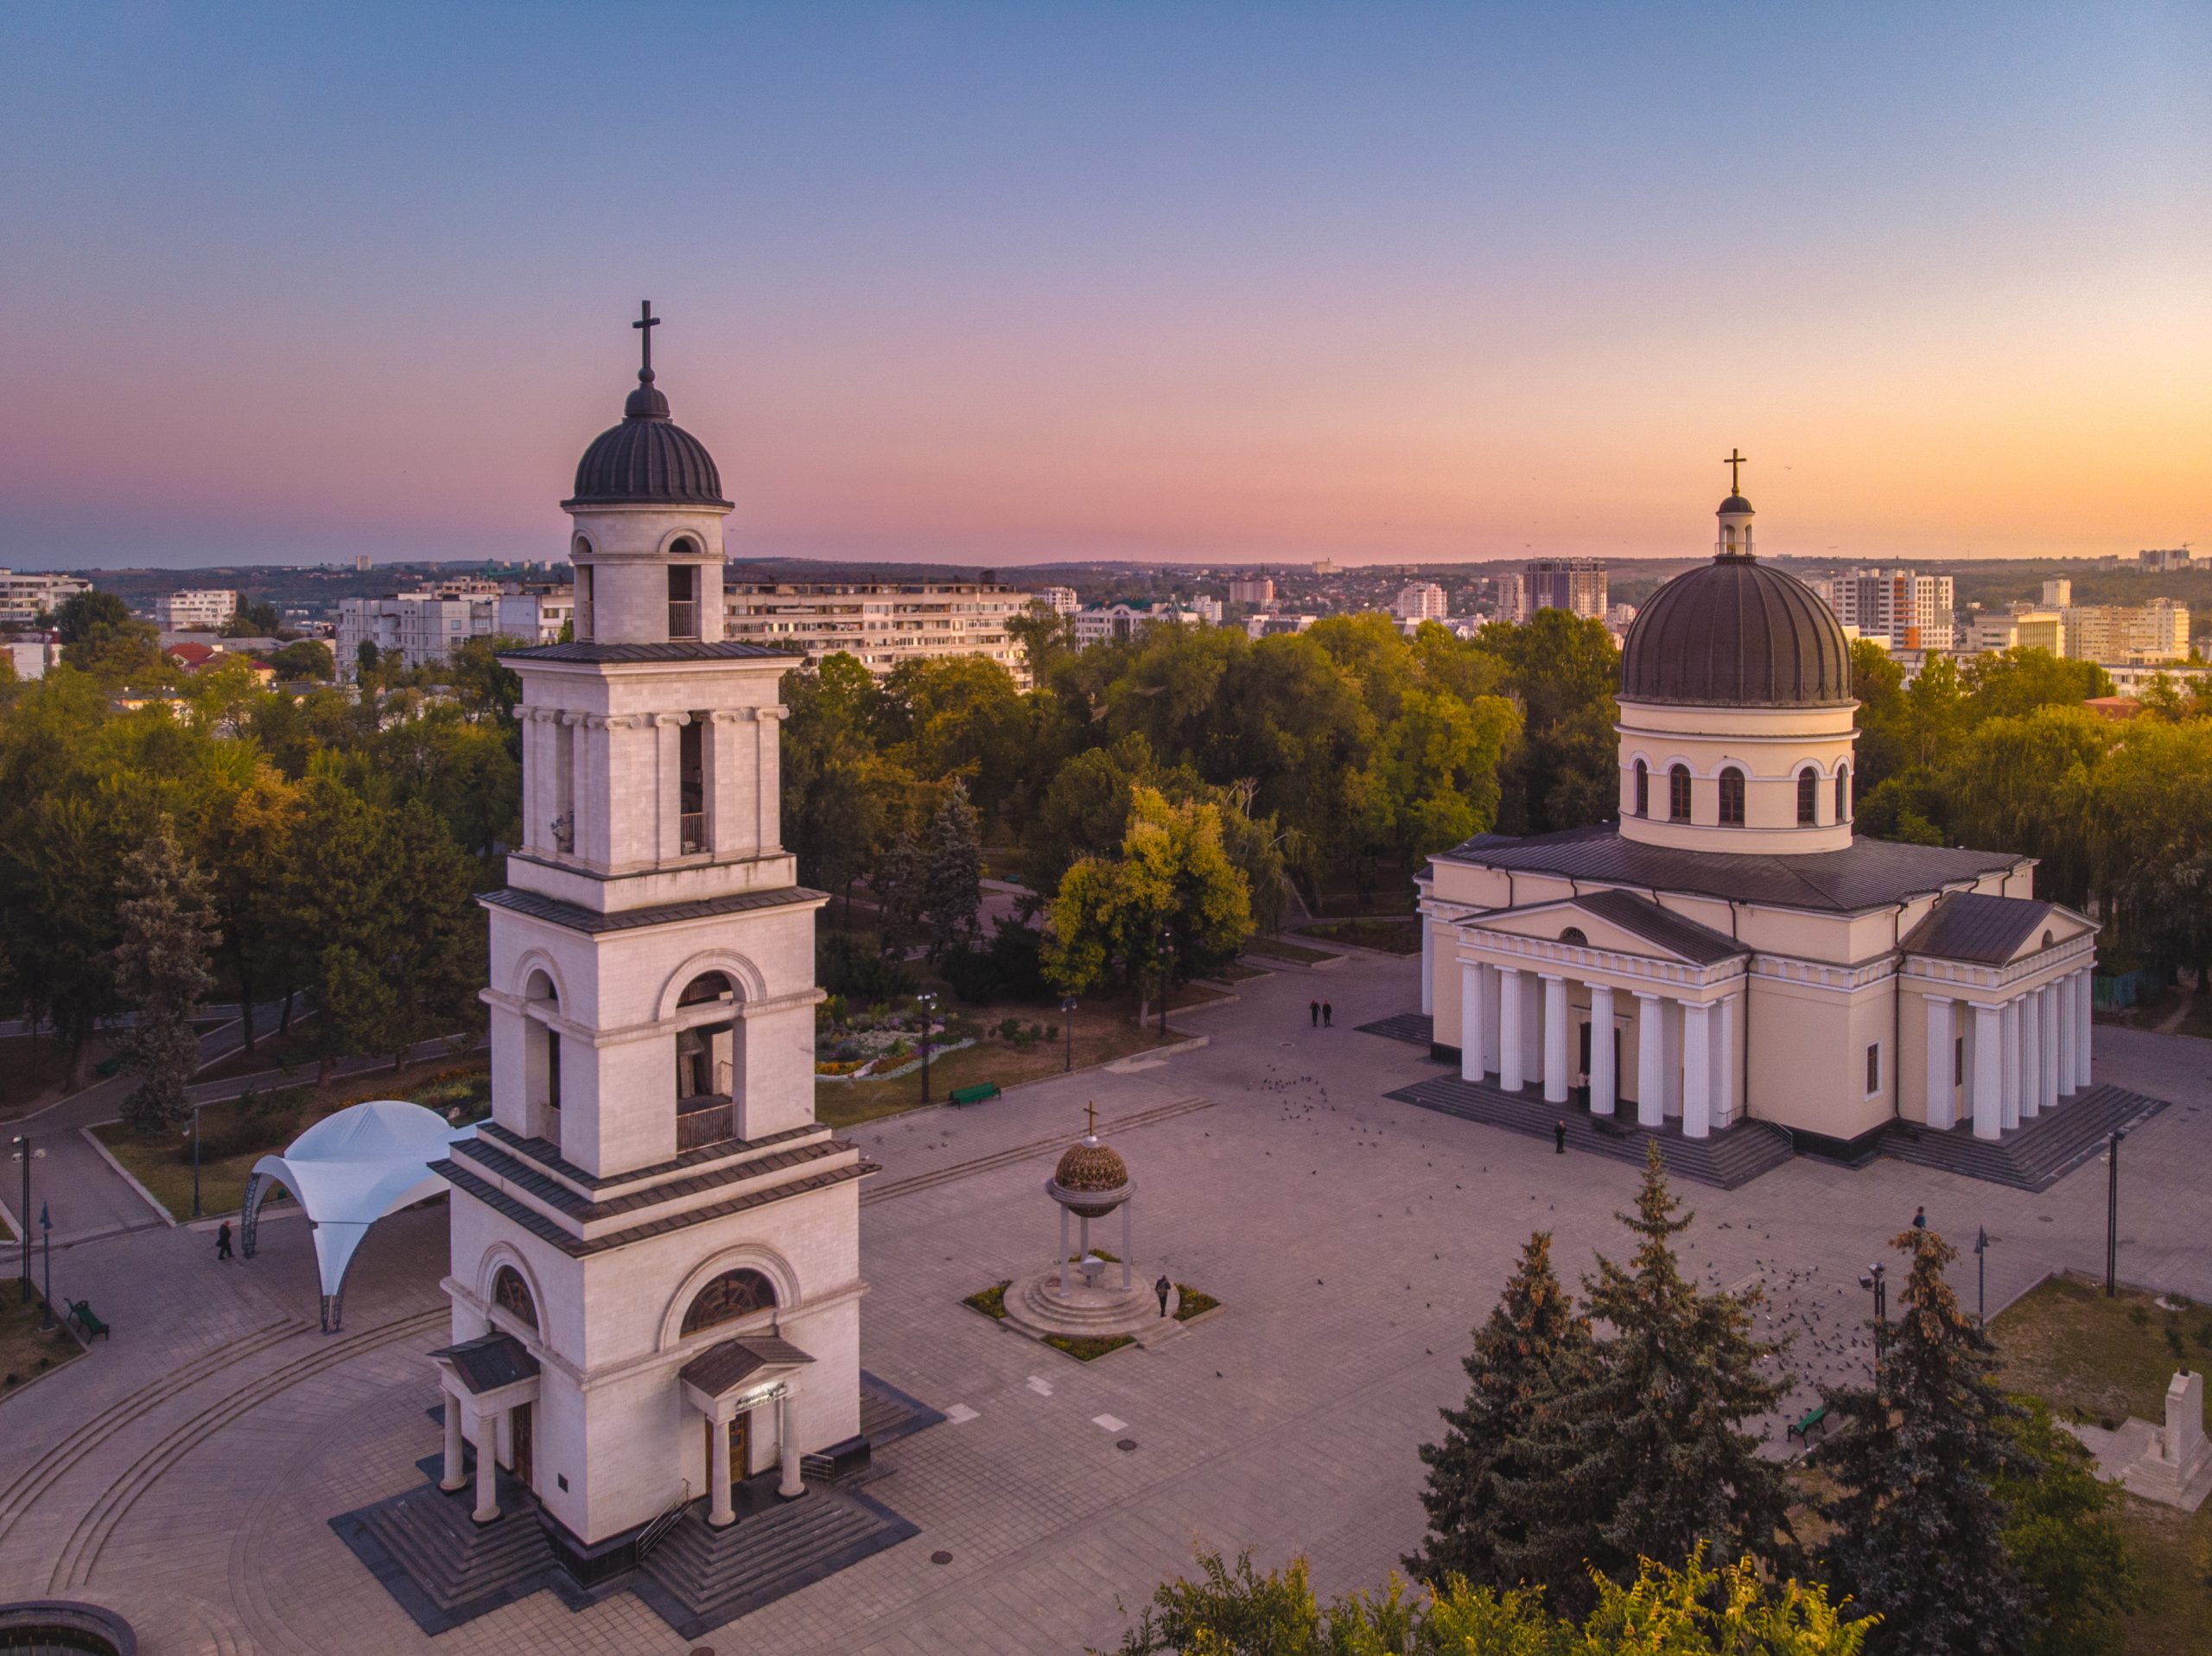 The ensemble of the Cathedral "Nastrea Domnului" - Best Architectural Buildings in Chisinau